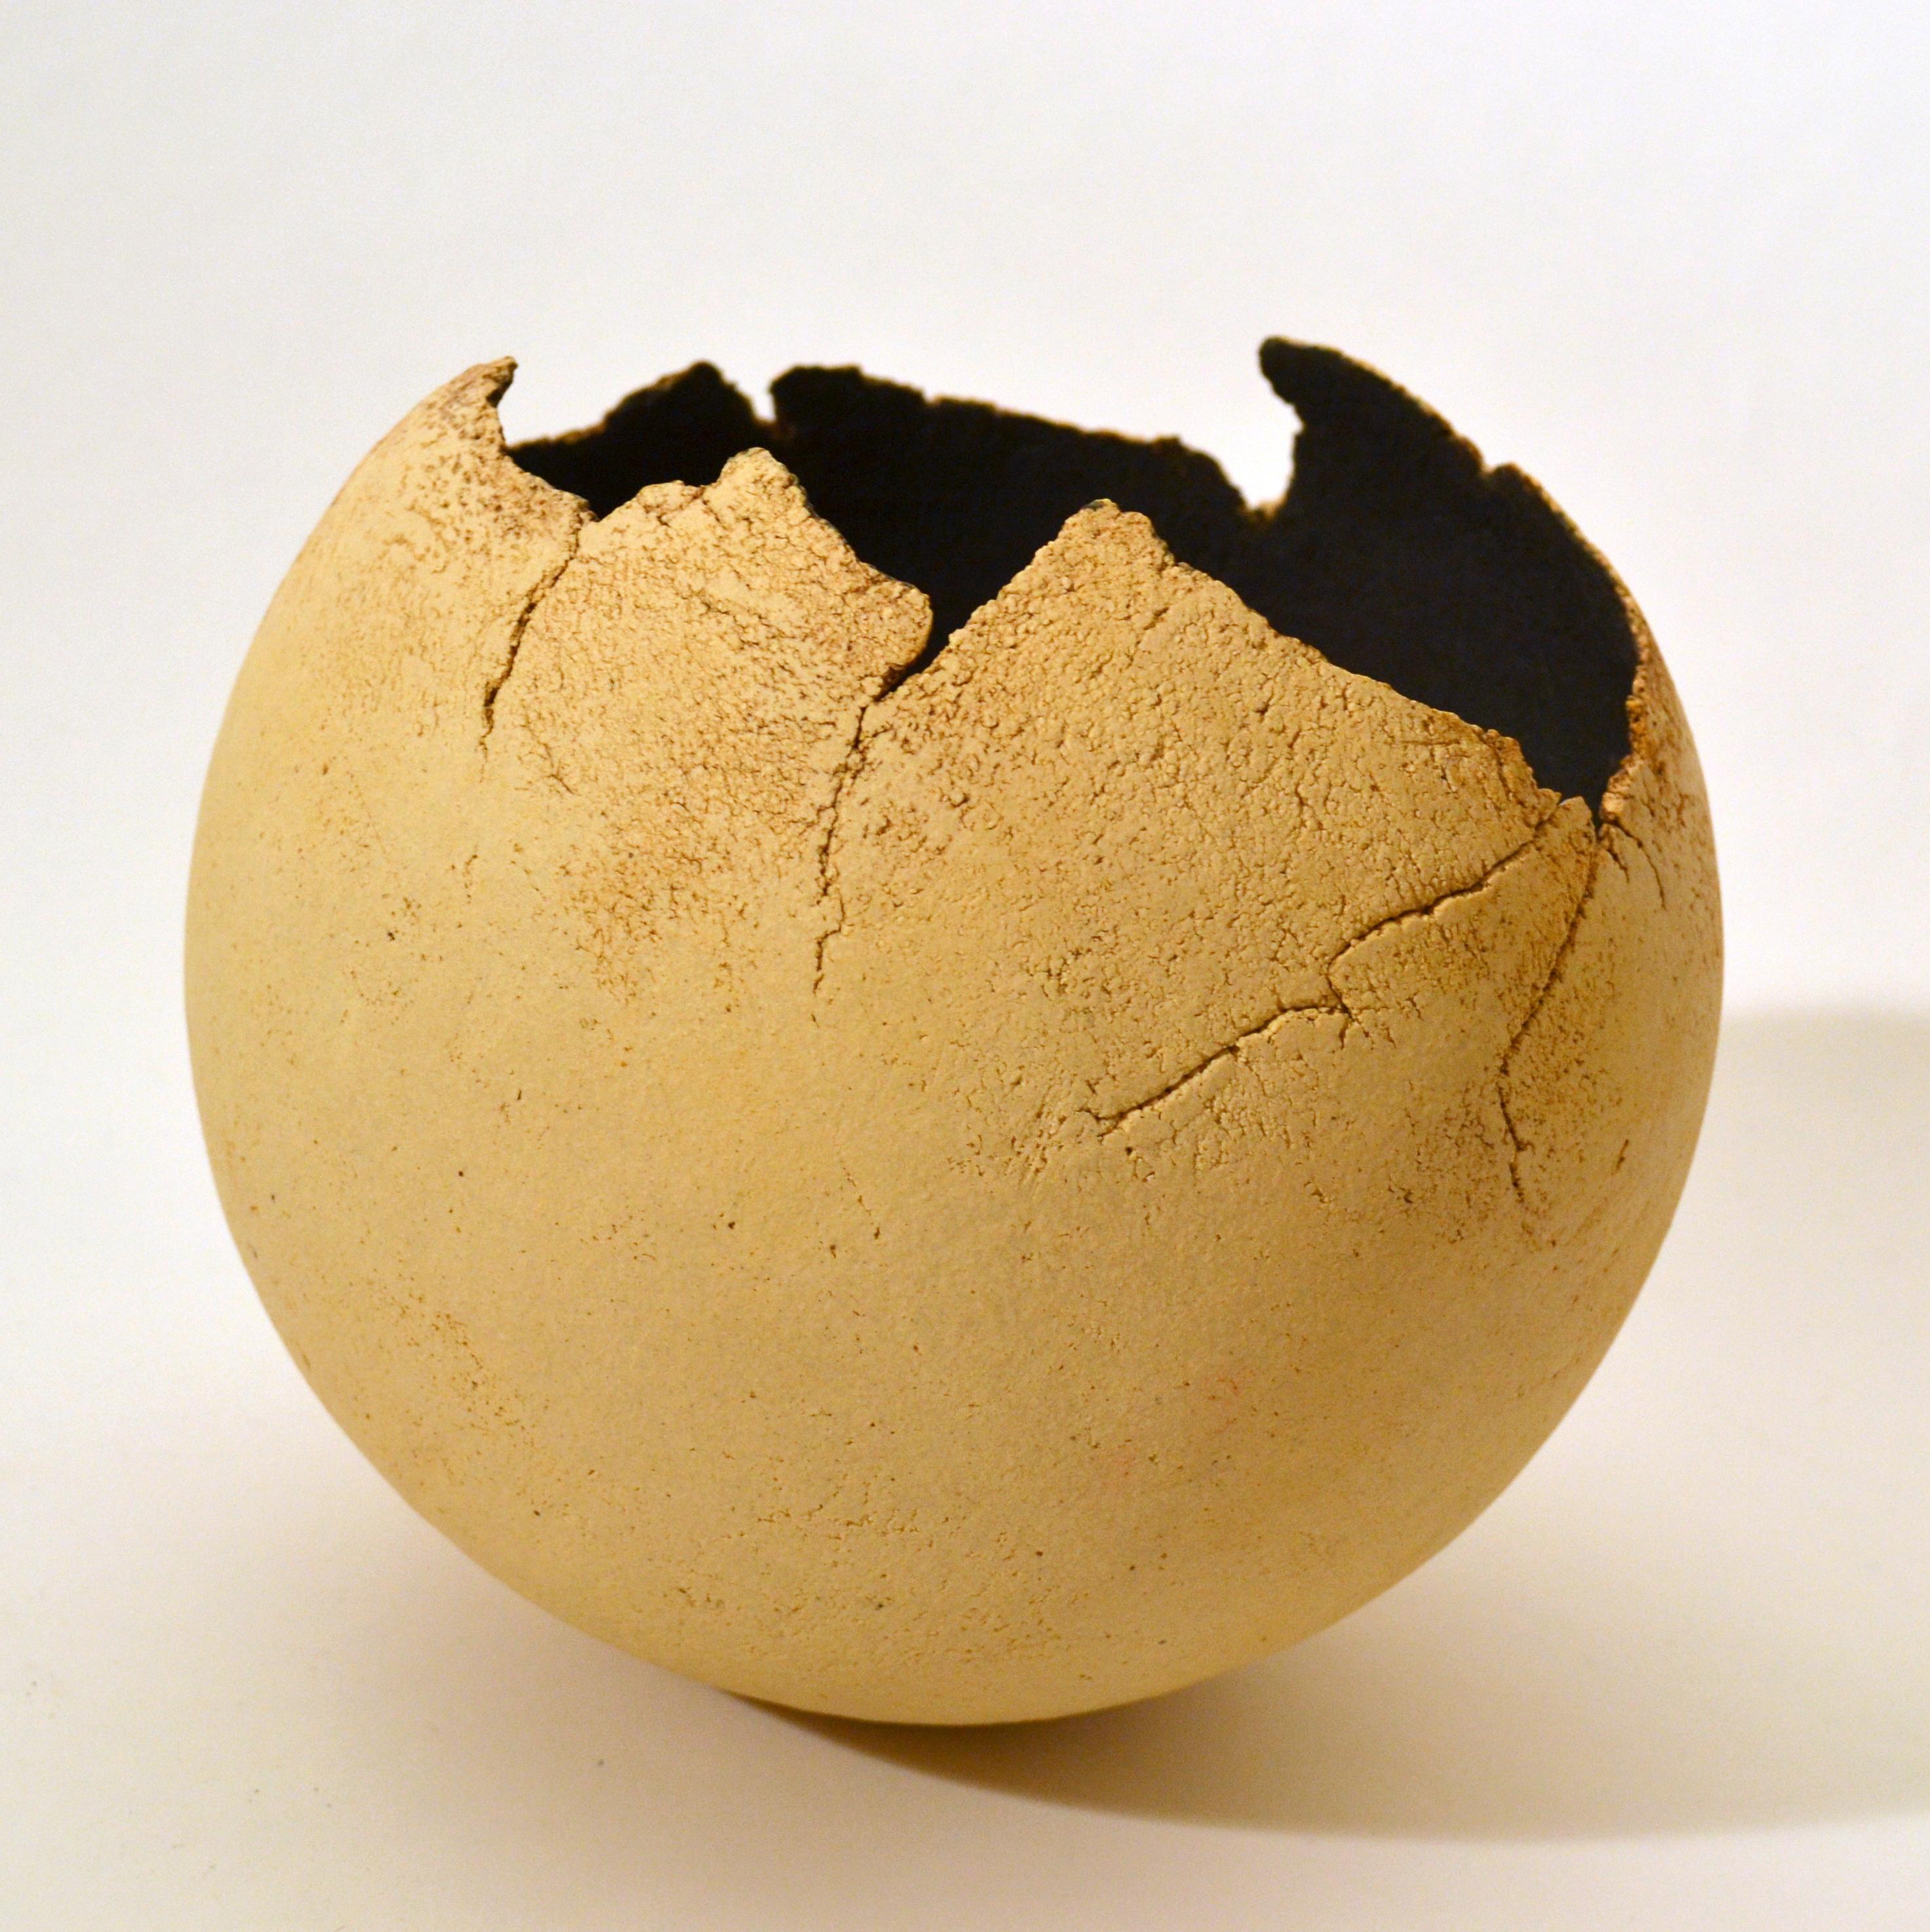 Sculptural round studio pottery decorative abstract bowl by unknown artisan producing this unique Raku fired ball shaped vessel, black inside and unglazed cream outside with the edges as a delicate broken egg shell.
The studio potter is one who is a